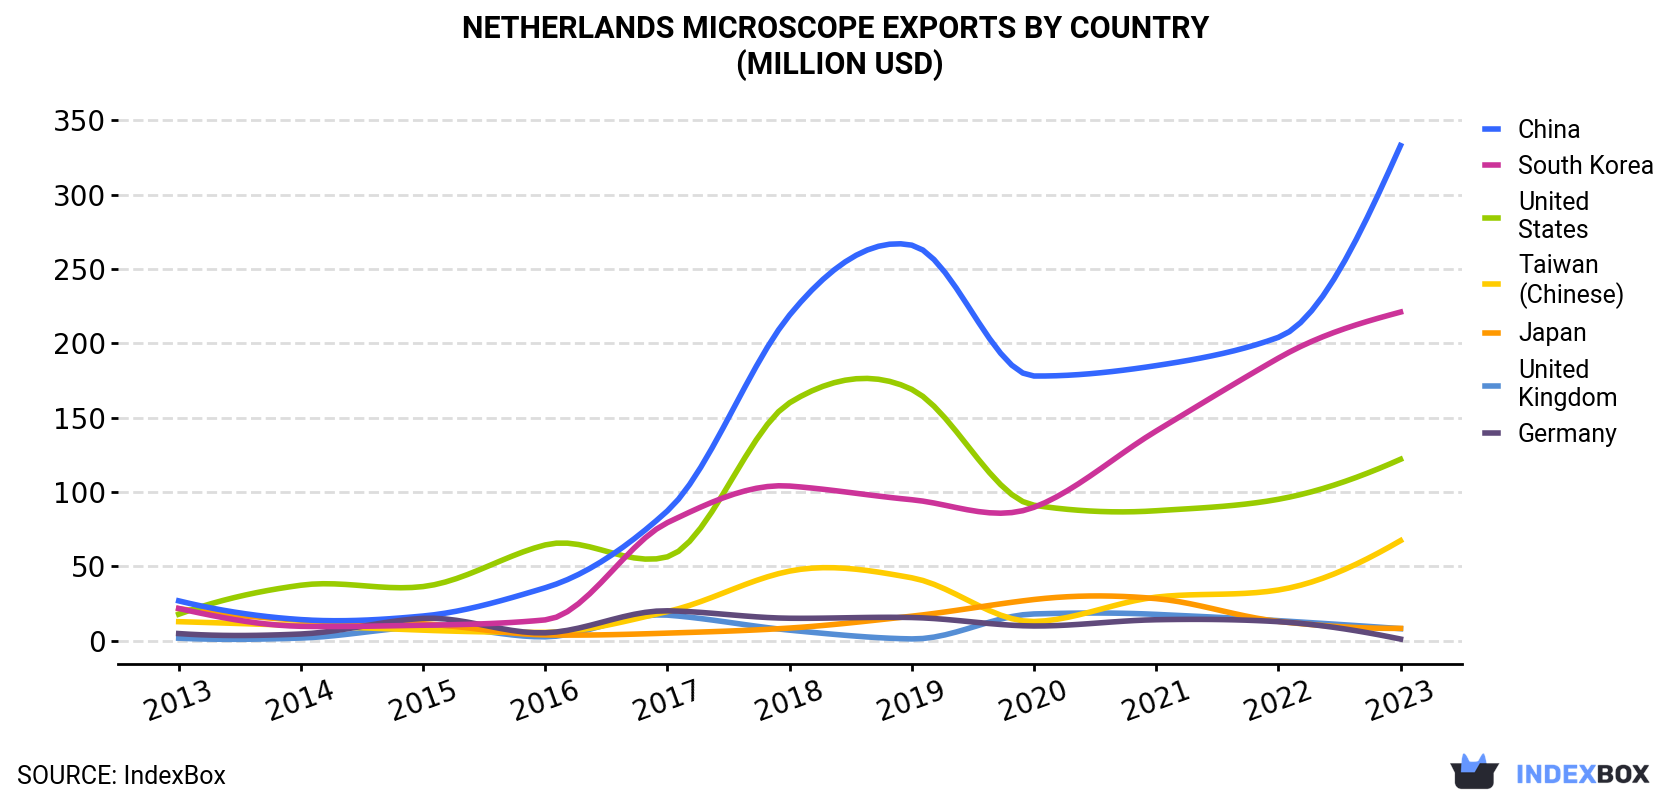 Netherlands Microscope Exports By Country (Million USD)